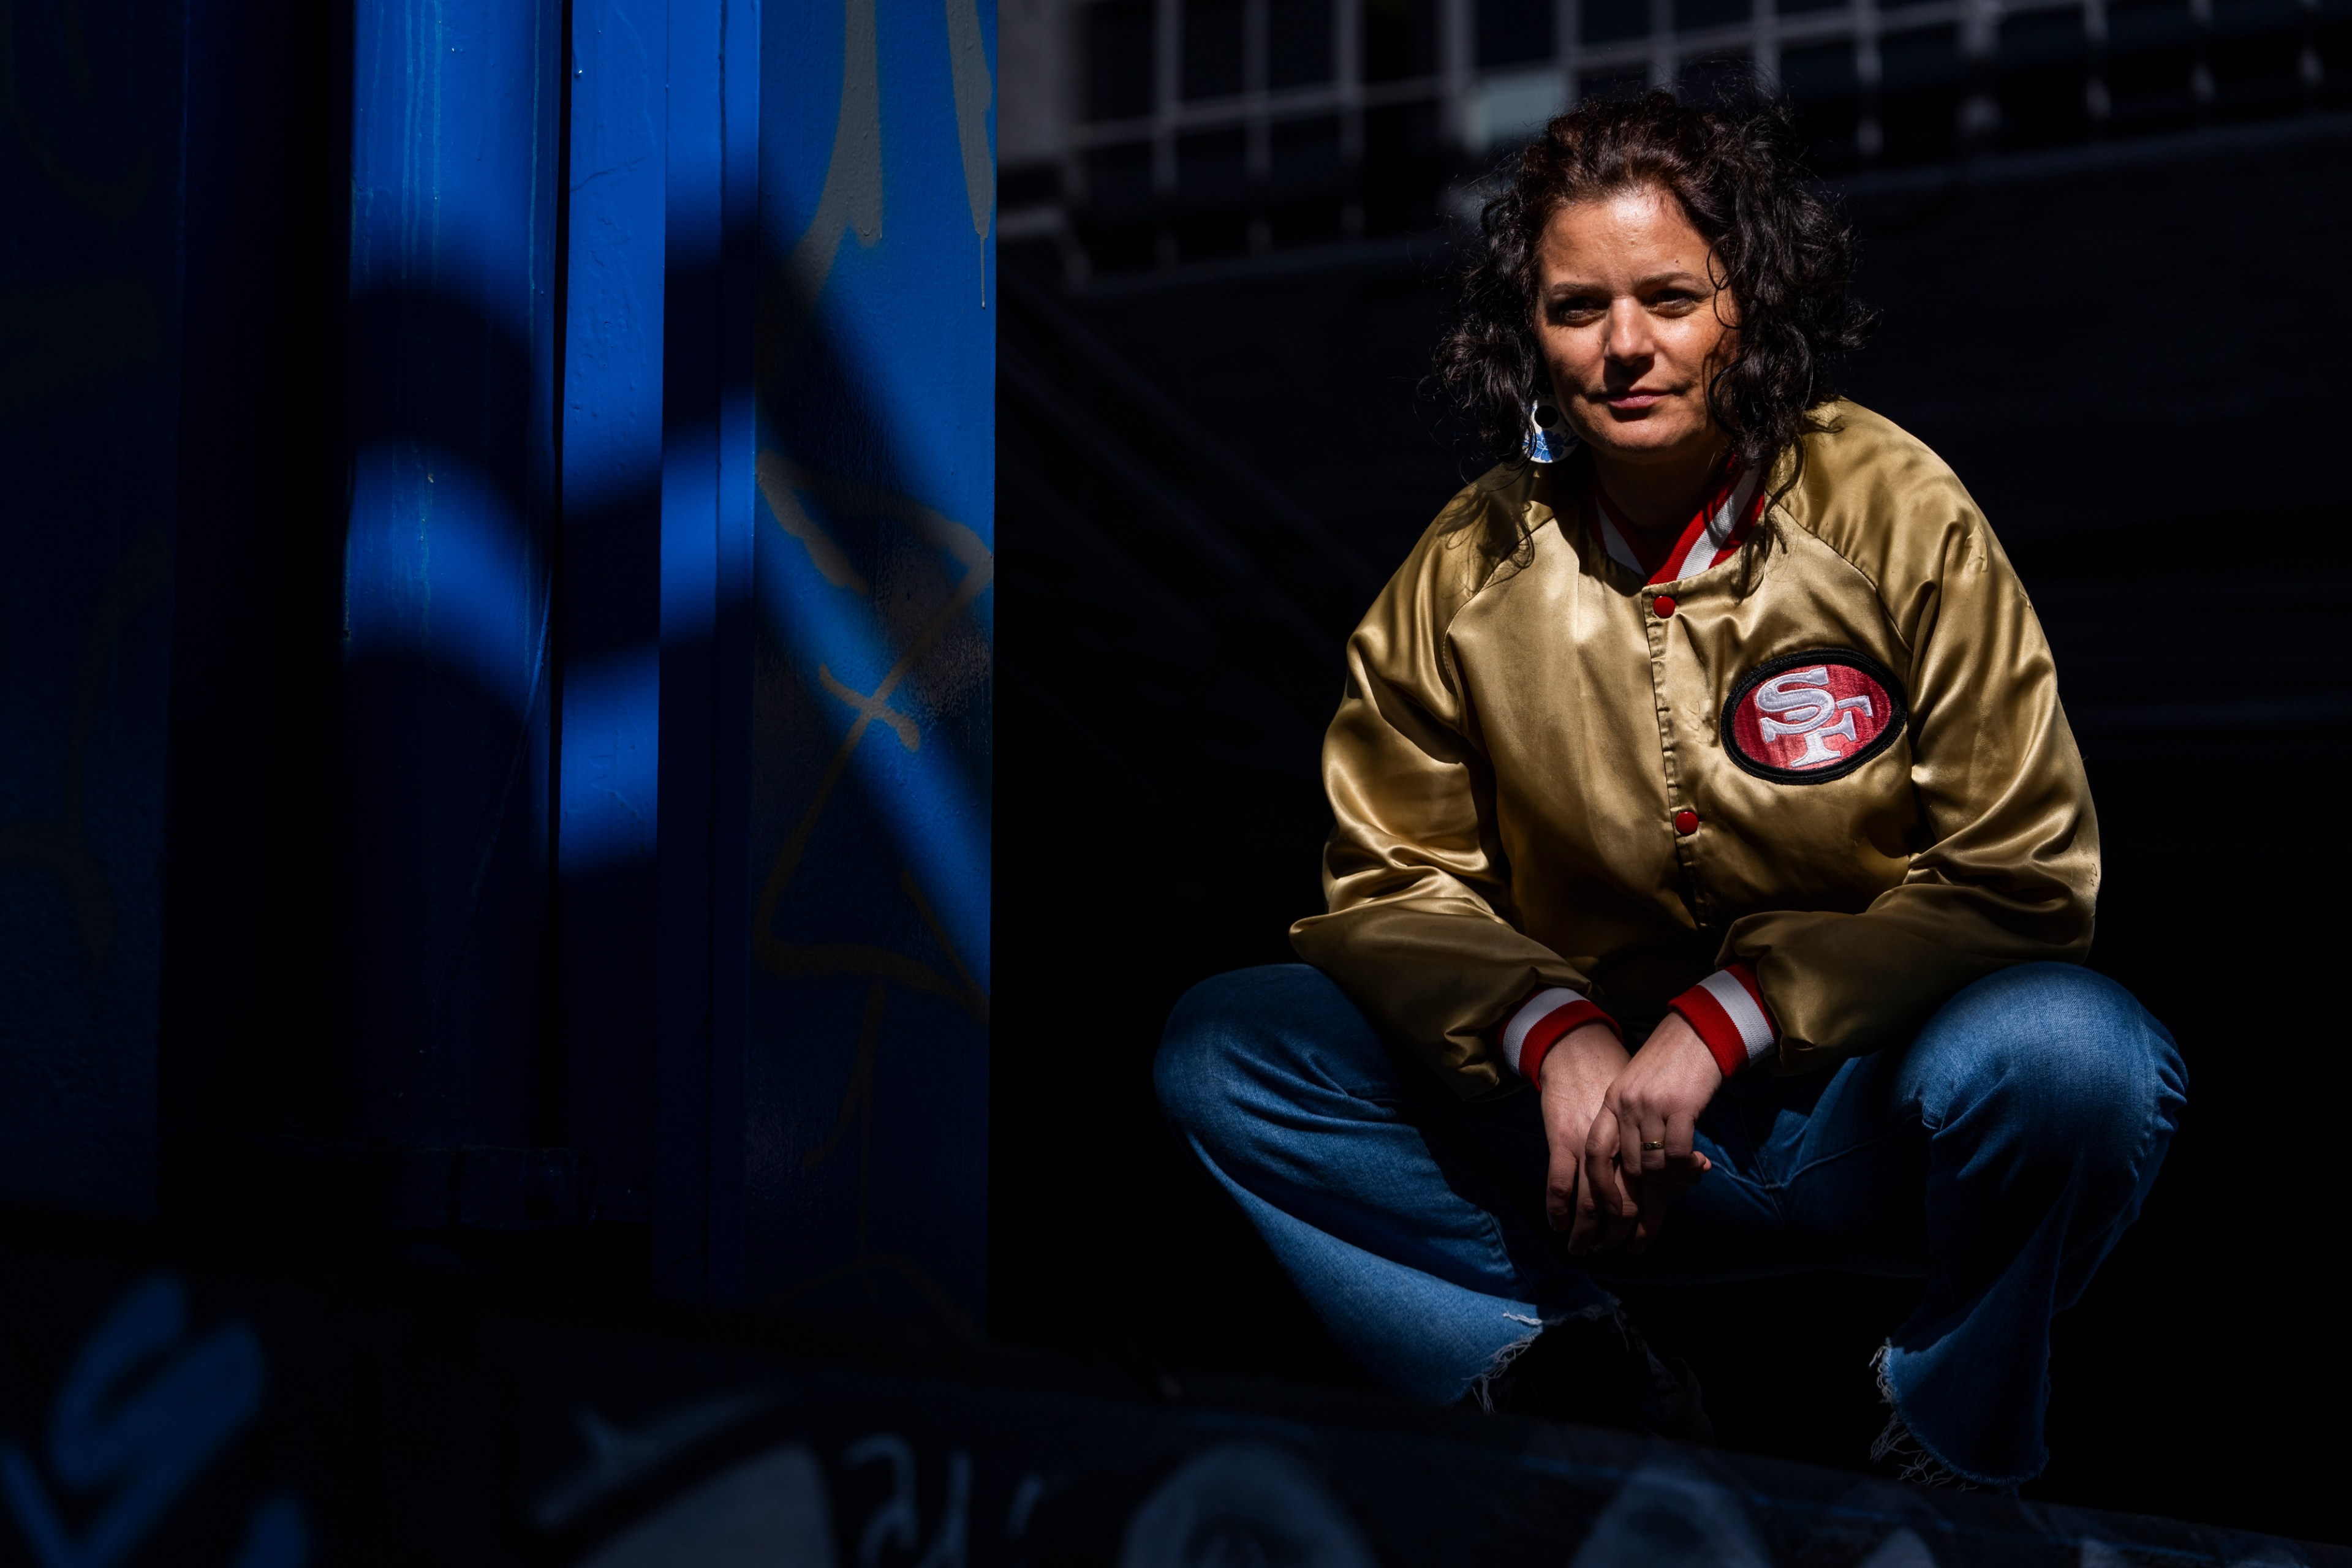 A person in a gold and red sports jacket squats in a shadowy area with graffiti, sunlit face and jacket prominent.